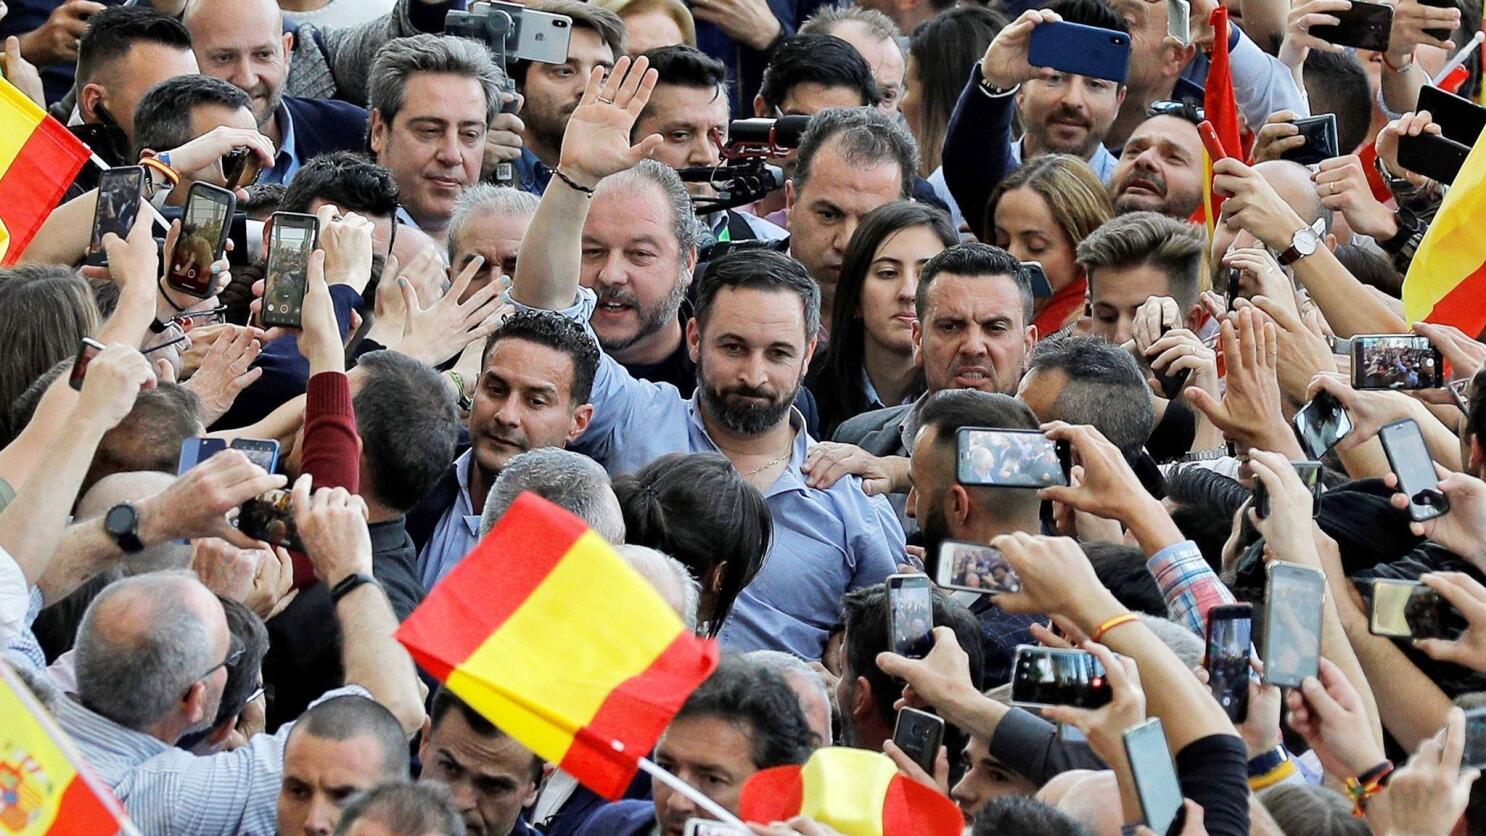 Vox: Who are Spain's hard-right party and who are their voters?